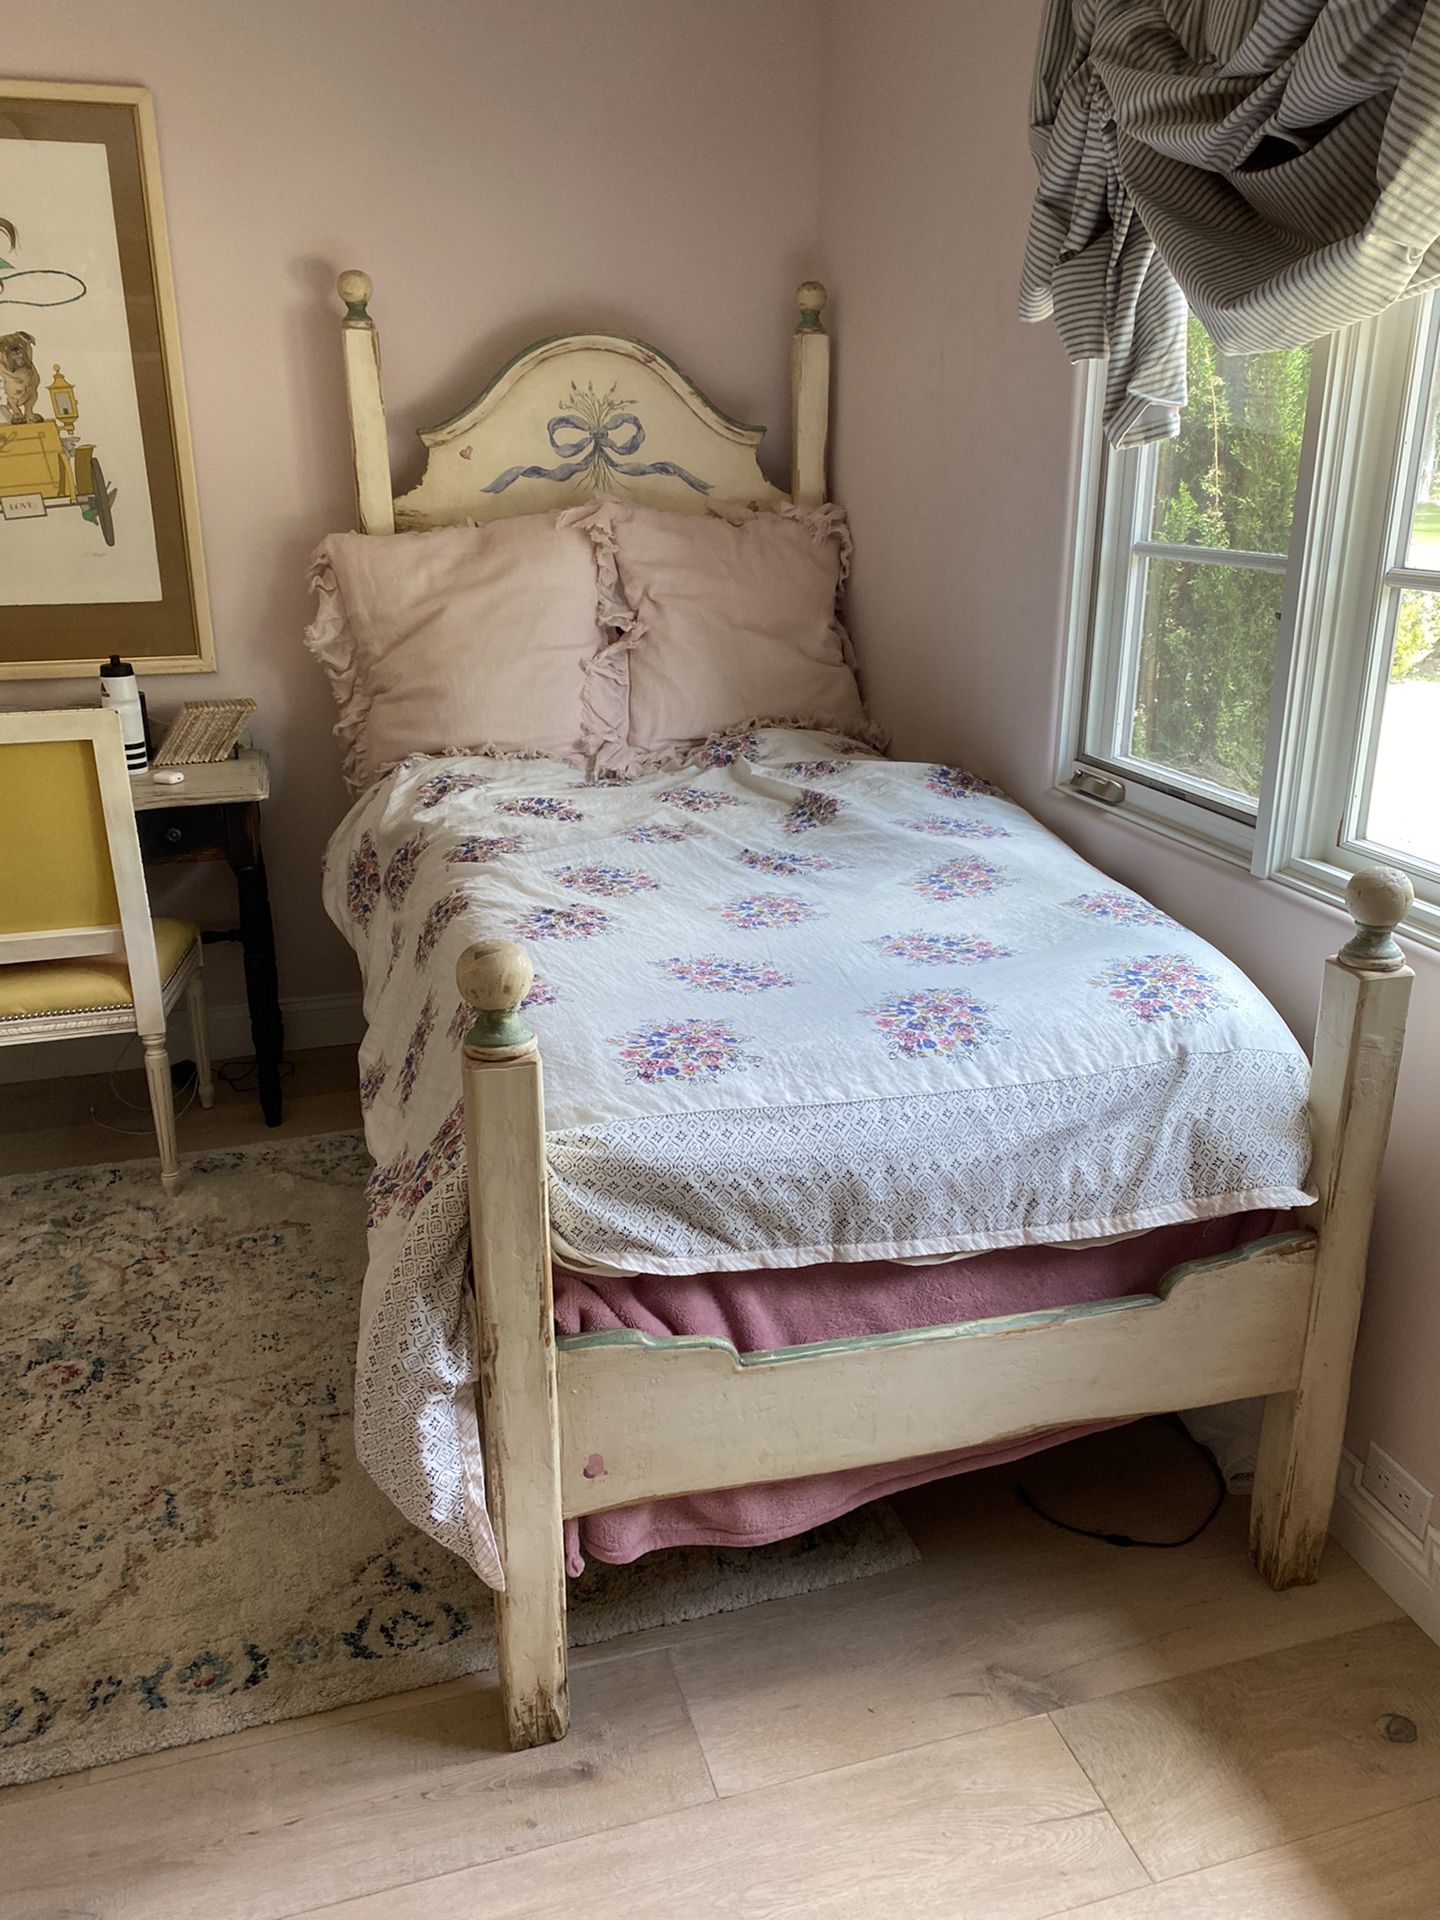 Bed Set - 2 Twin Vintage Hand Painted Beds - Complete w Mattresses